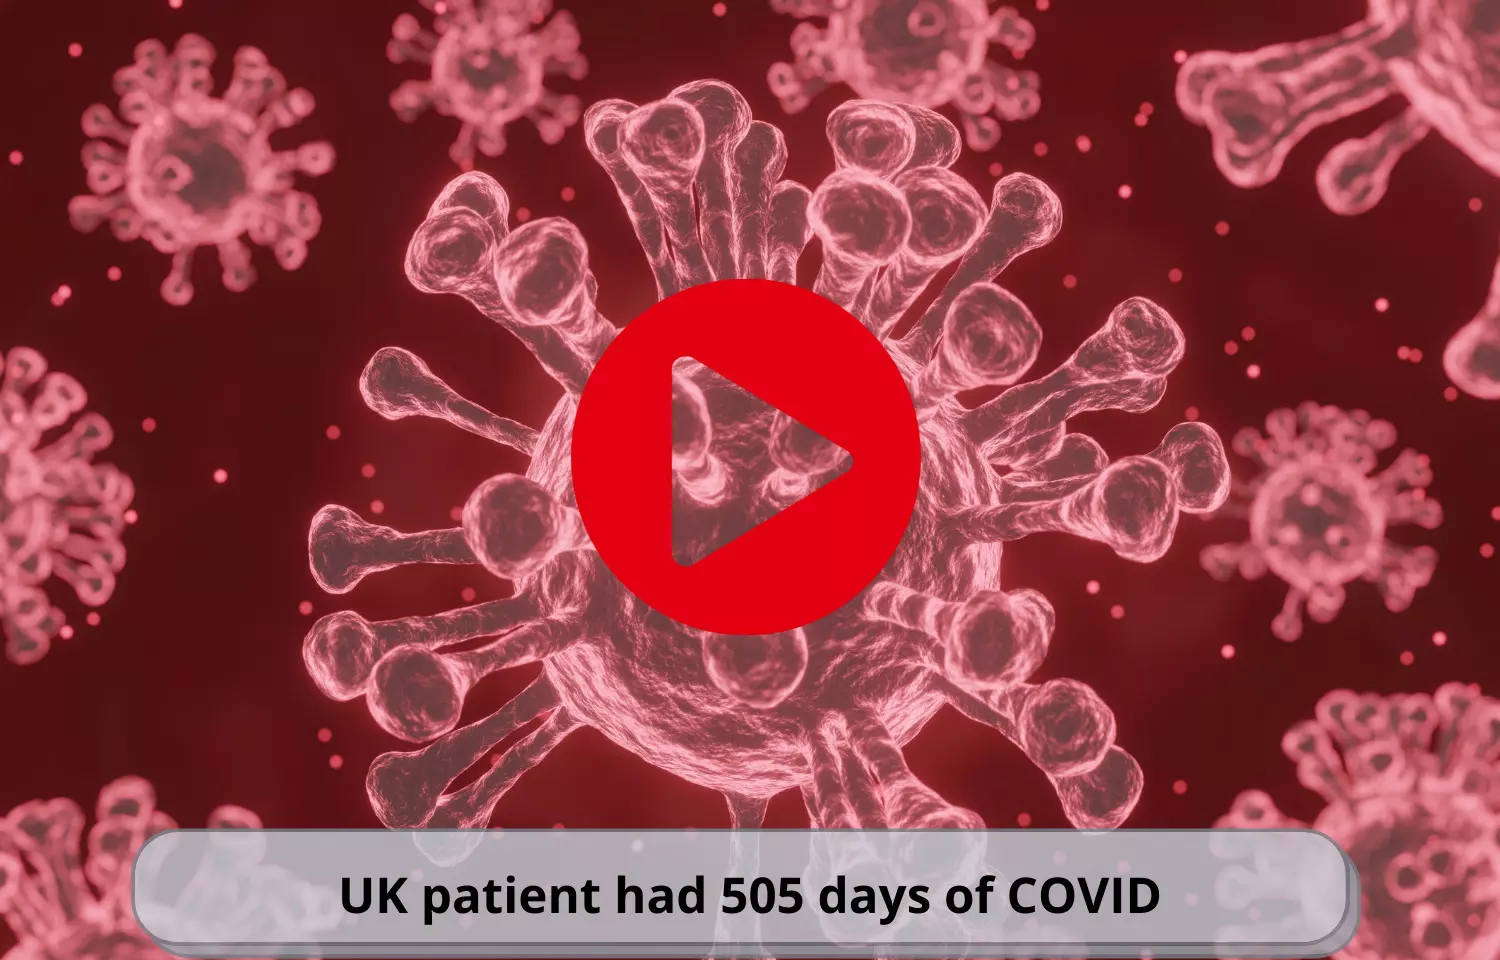 Patient had COVID for 505 days straight: Study